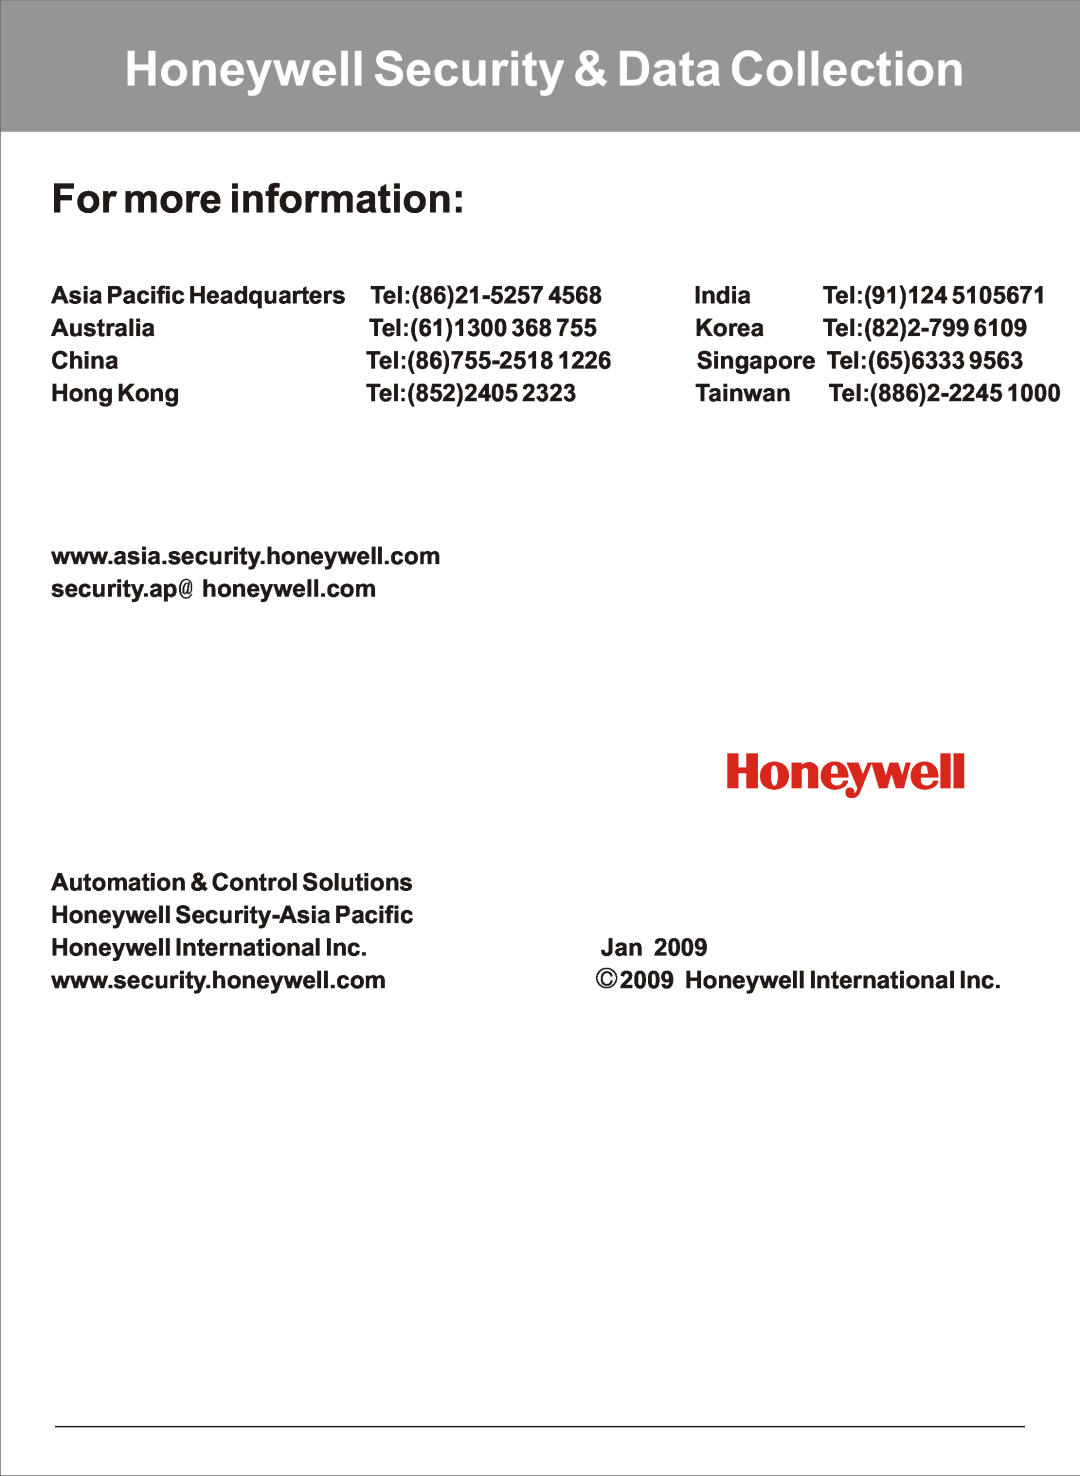 Honeywell HS-6270 user manual Honeywell Security & Data Collection, For more information 